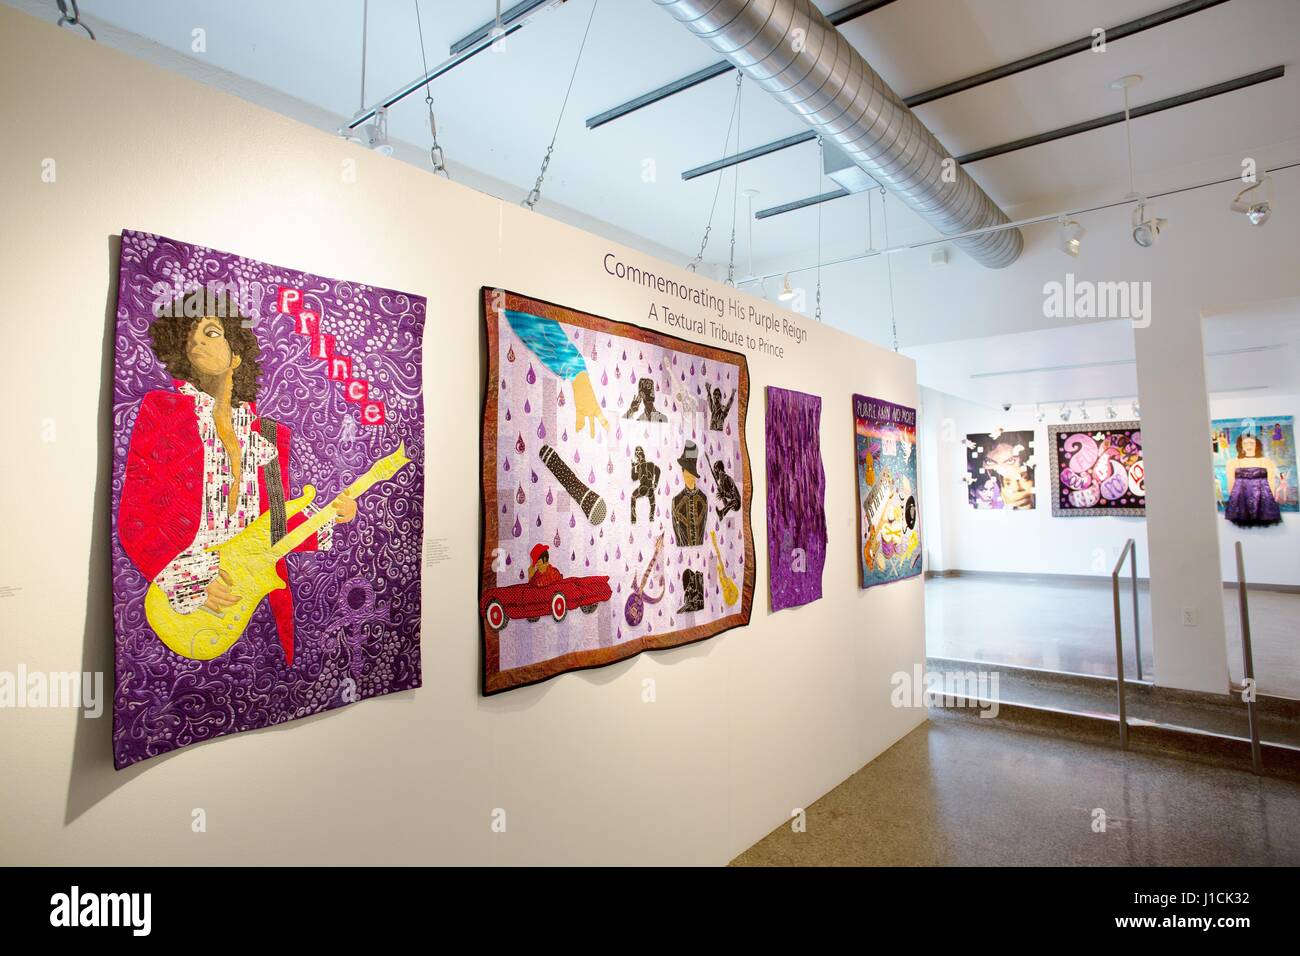 A display of handmade quilts made in honor of Prince, on display at the Textile Center in St. Paul, Minnesota, USA. Stock Photo